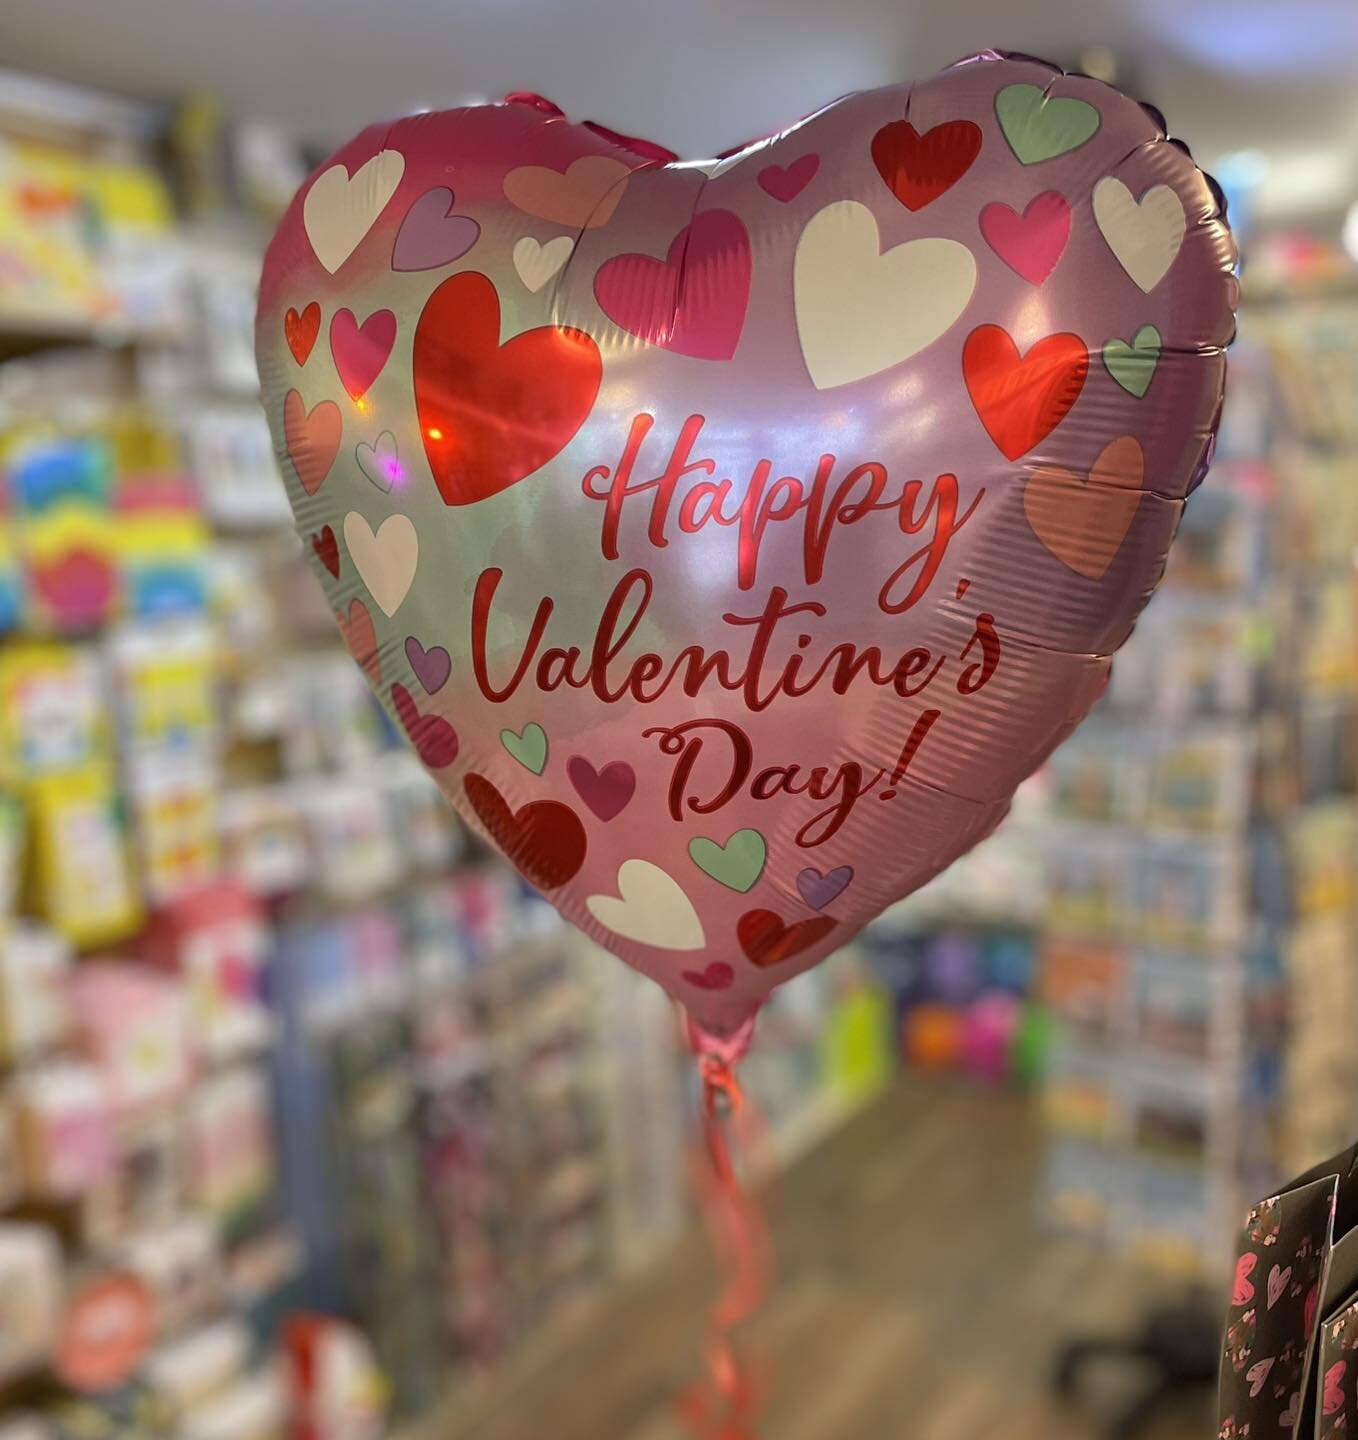 Don&rsquo;t forget - it&rsquo;s tomorrow!! Still plenty of cards to choose from and a few balloons available 
 ❤️🌹❤️🌹❤️🌹❤️
#valentines #valentinesdaygifts #valentinesdaycards